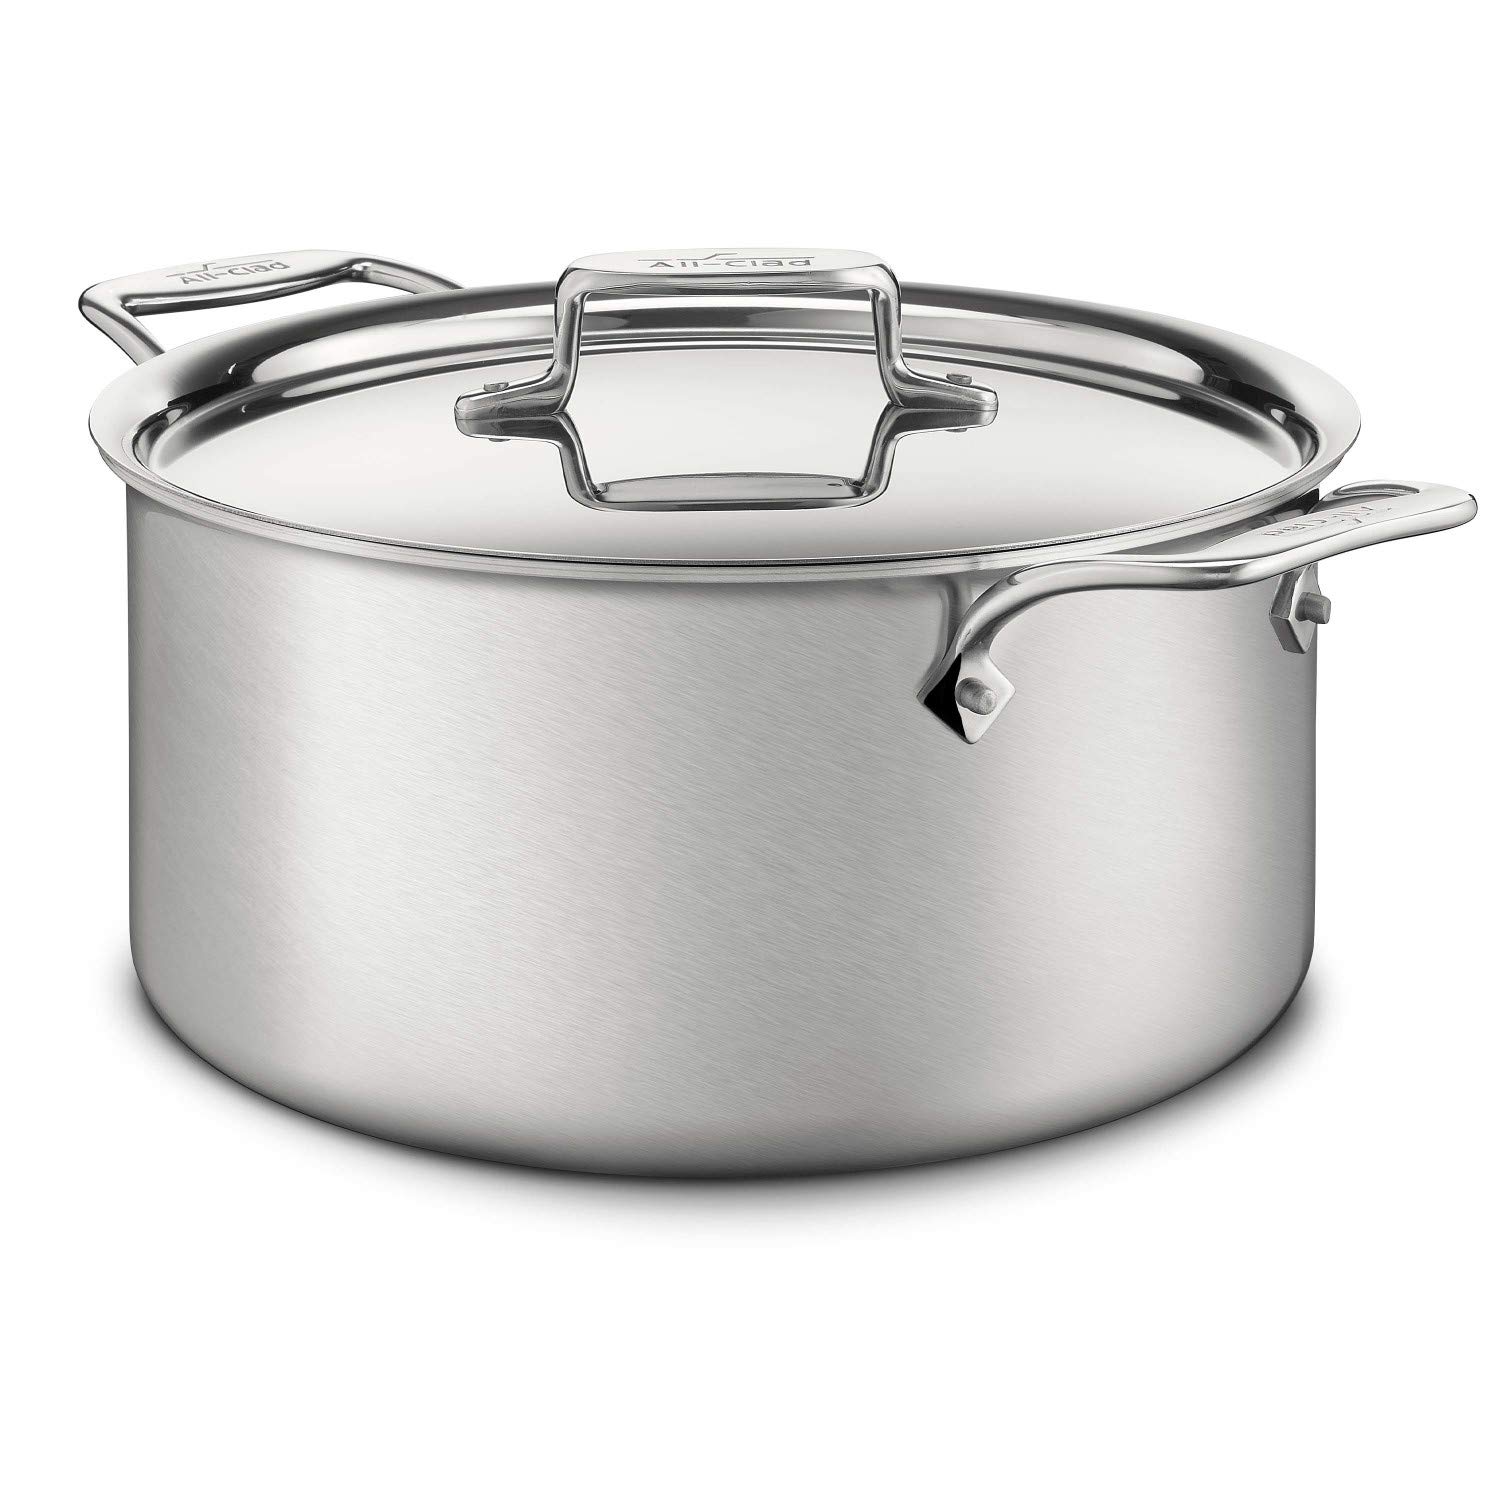 All-Clad BD55508 D5 Brushed 18/10 Stainless Steel 5-Ply Bonded Dishwasher Safe Stockpot Cookware, 8-Quart, Silver